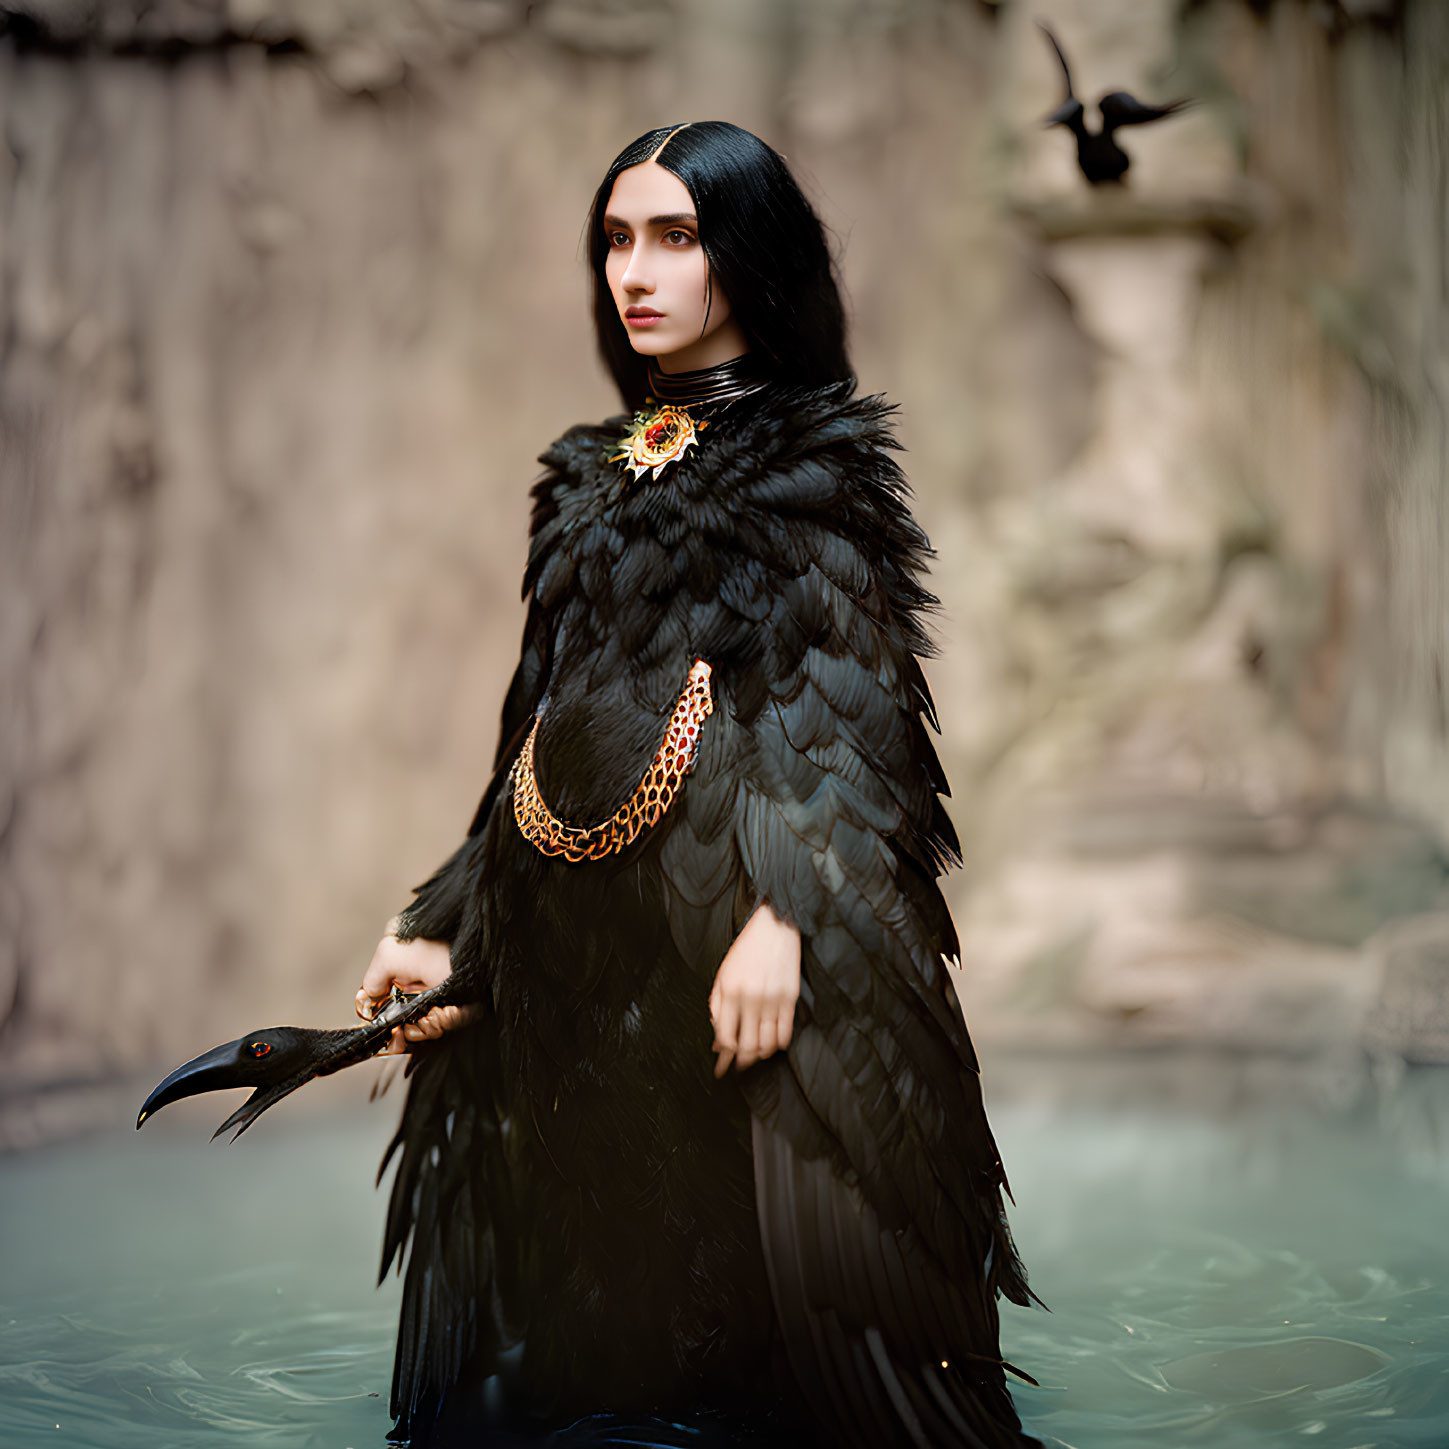 Person in feathered black outfit with bird-themed necklace holding a raven in water with flying birds.